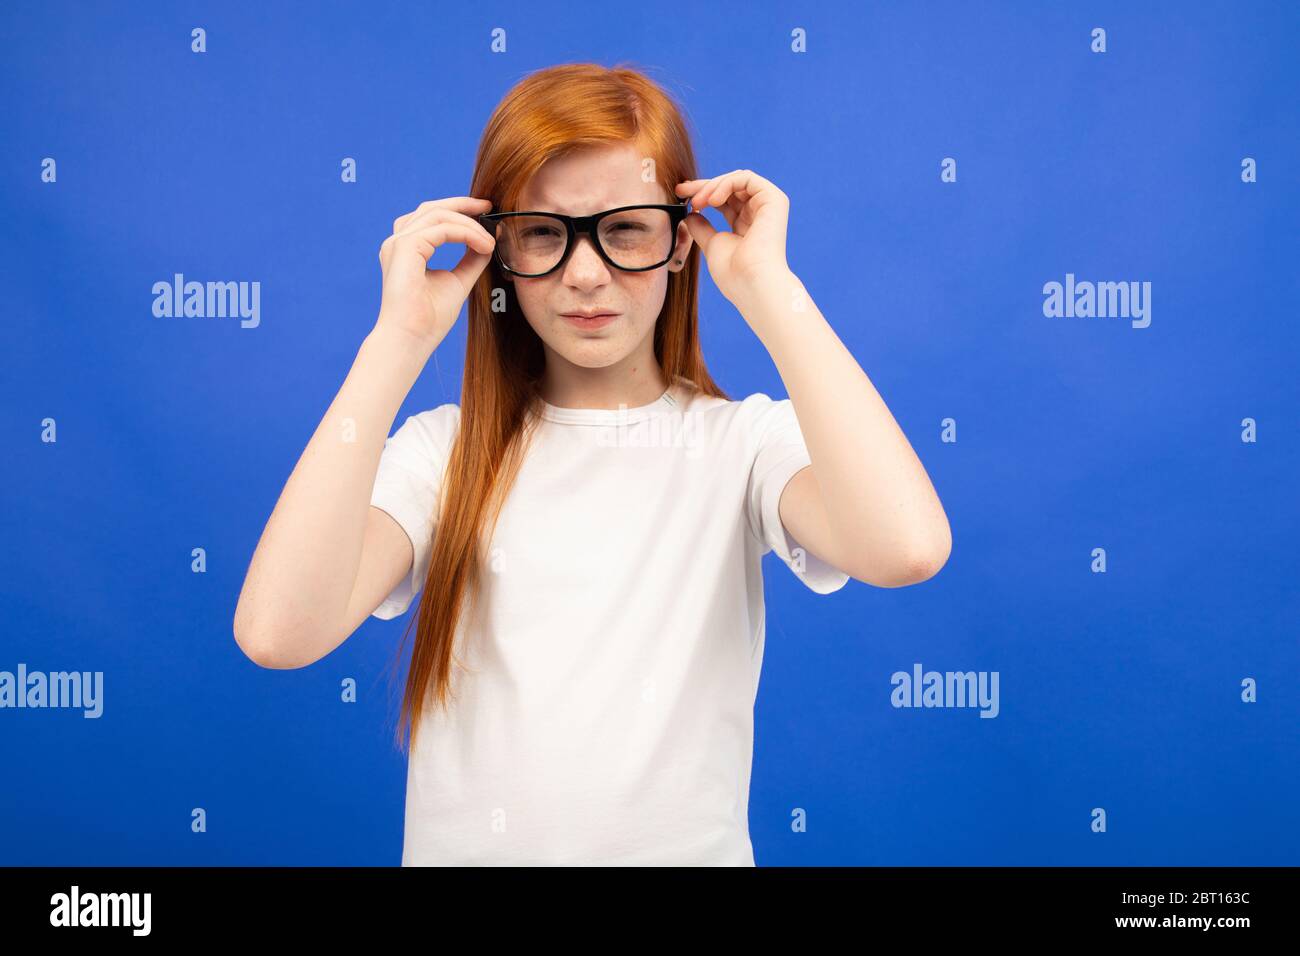 red-haired teenager girl squints while holding glasses in her hand on a blue studio background. Stock Photo